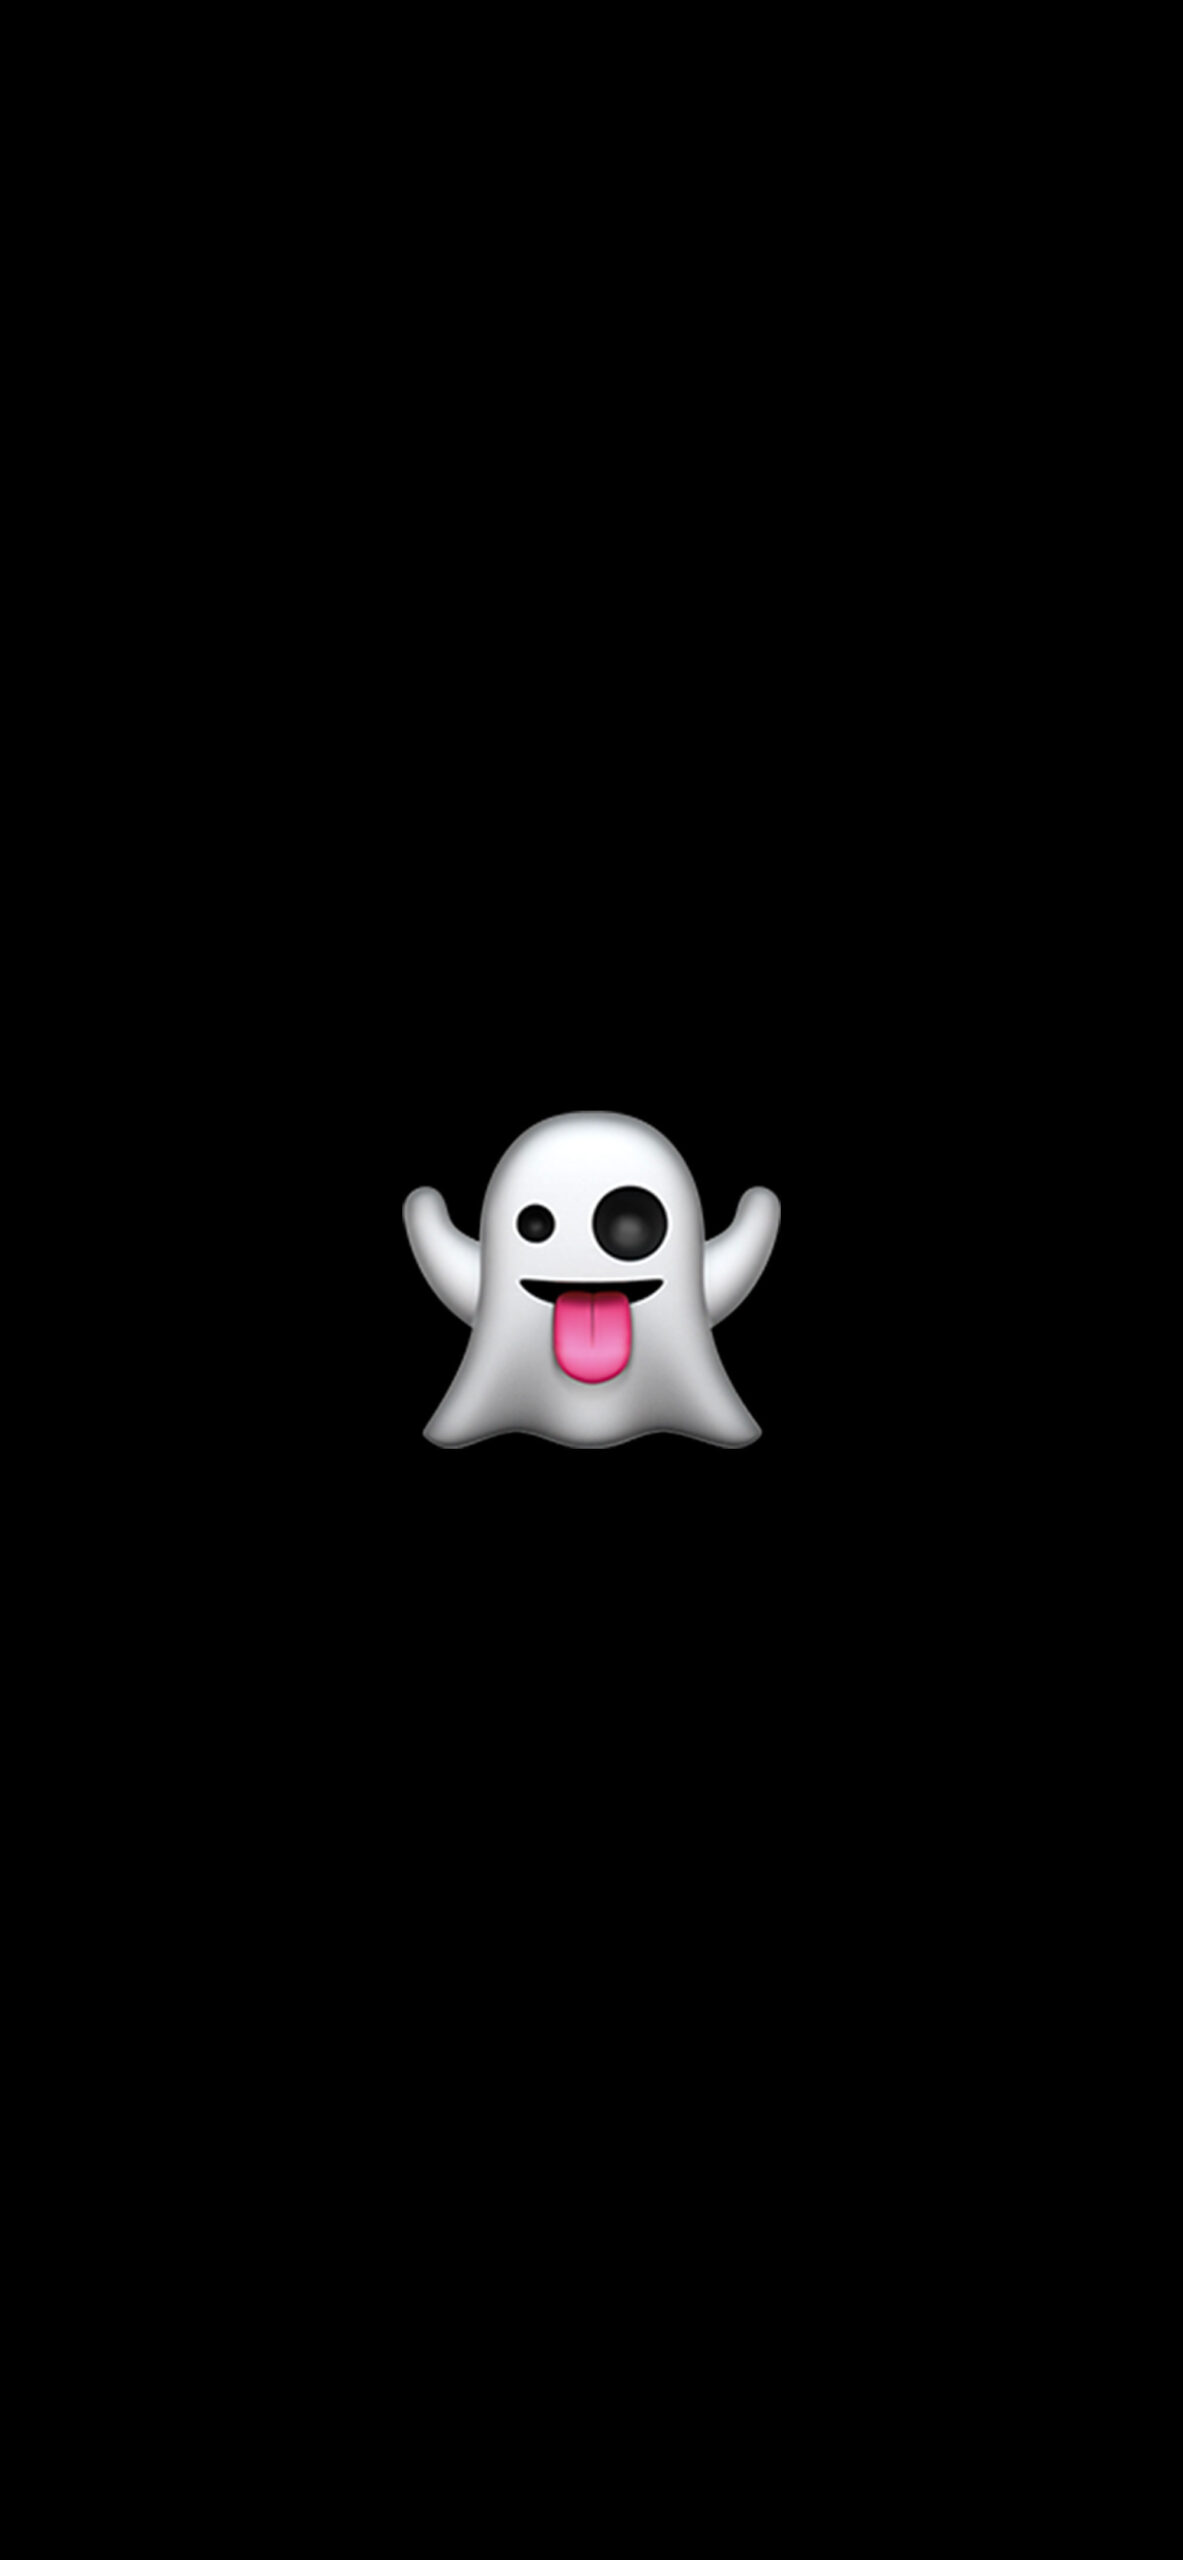 Minimalist Emoji Wallpaper with Ghost, Candle & Castle - Black Wallpapers